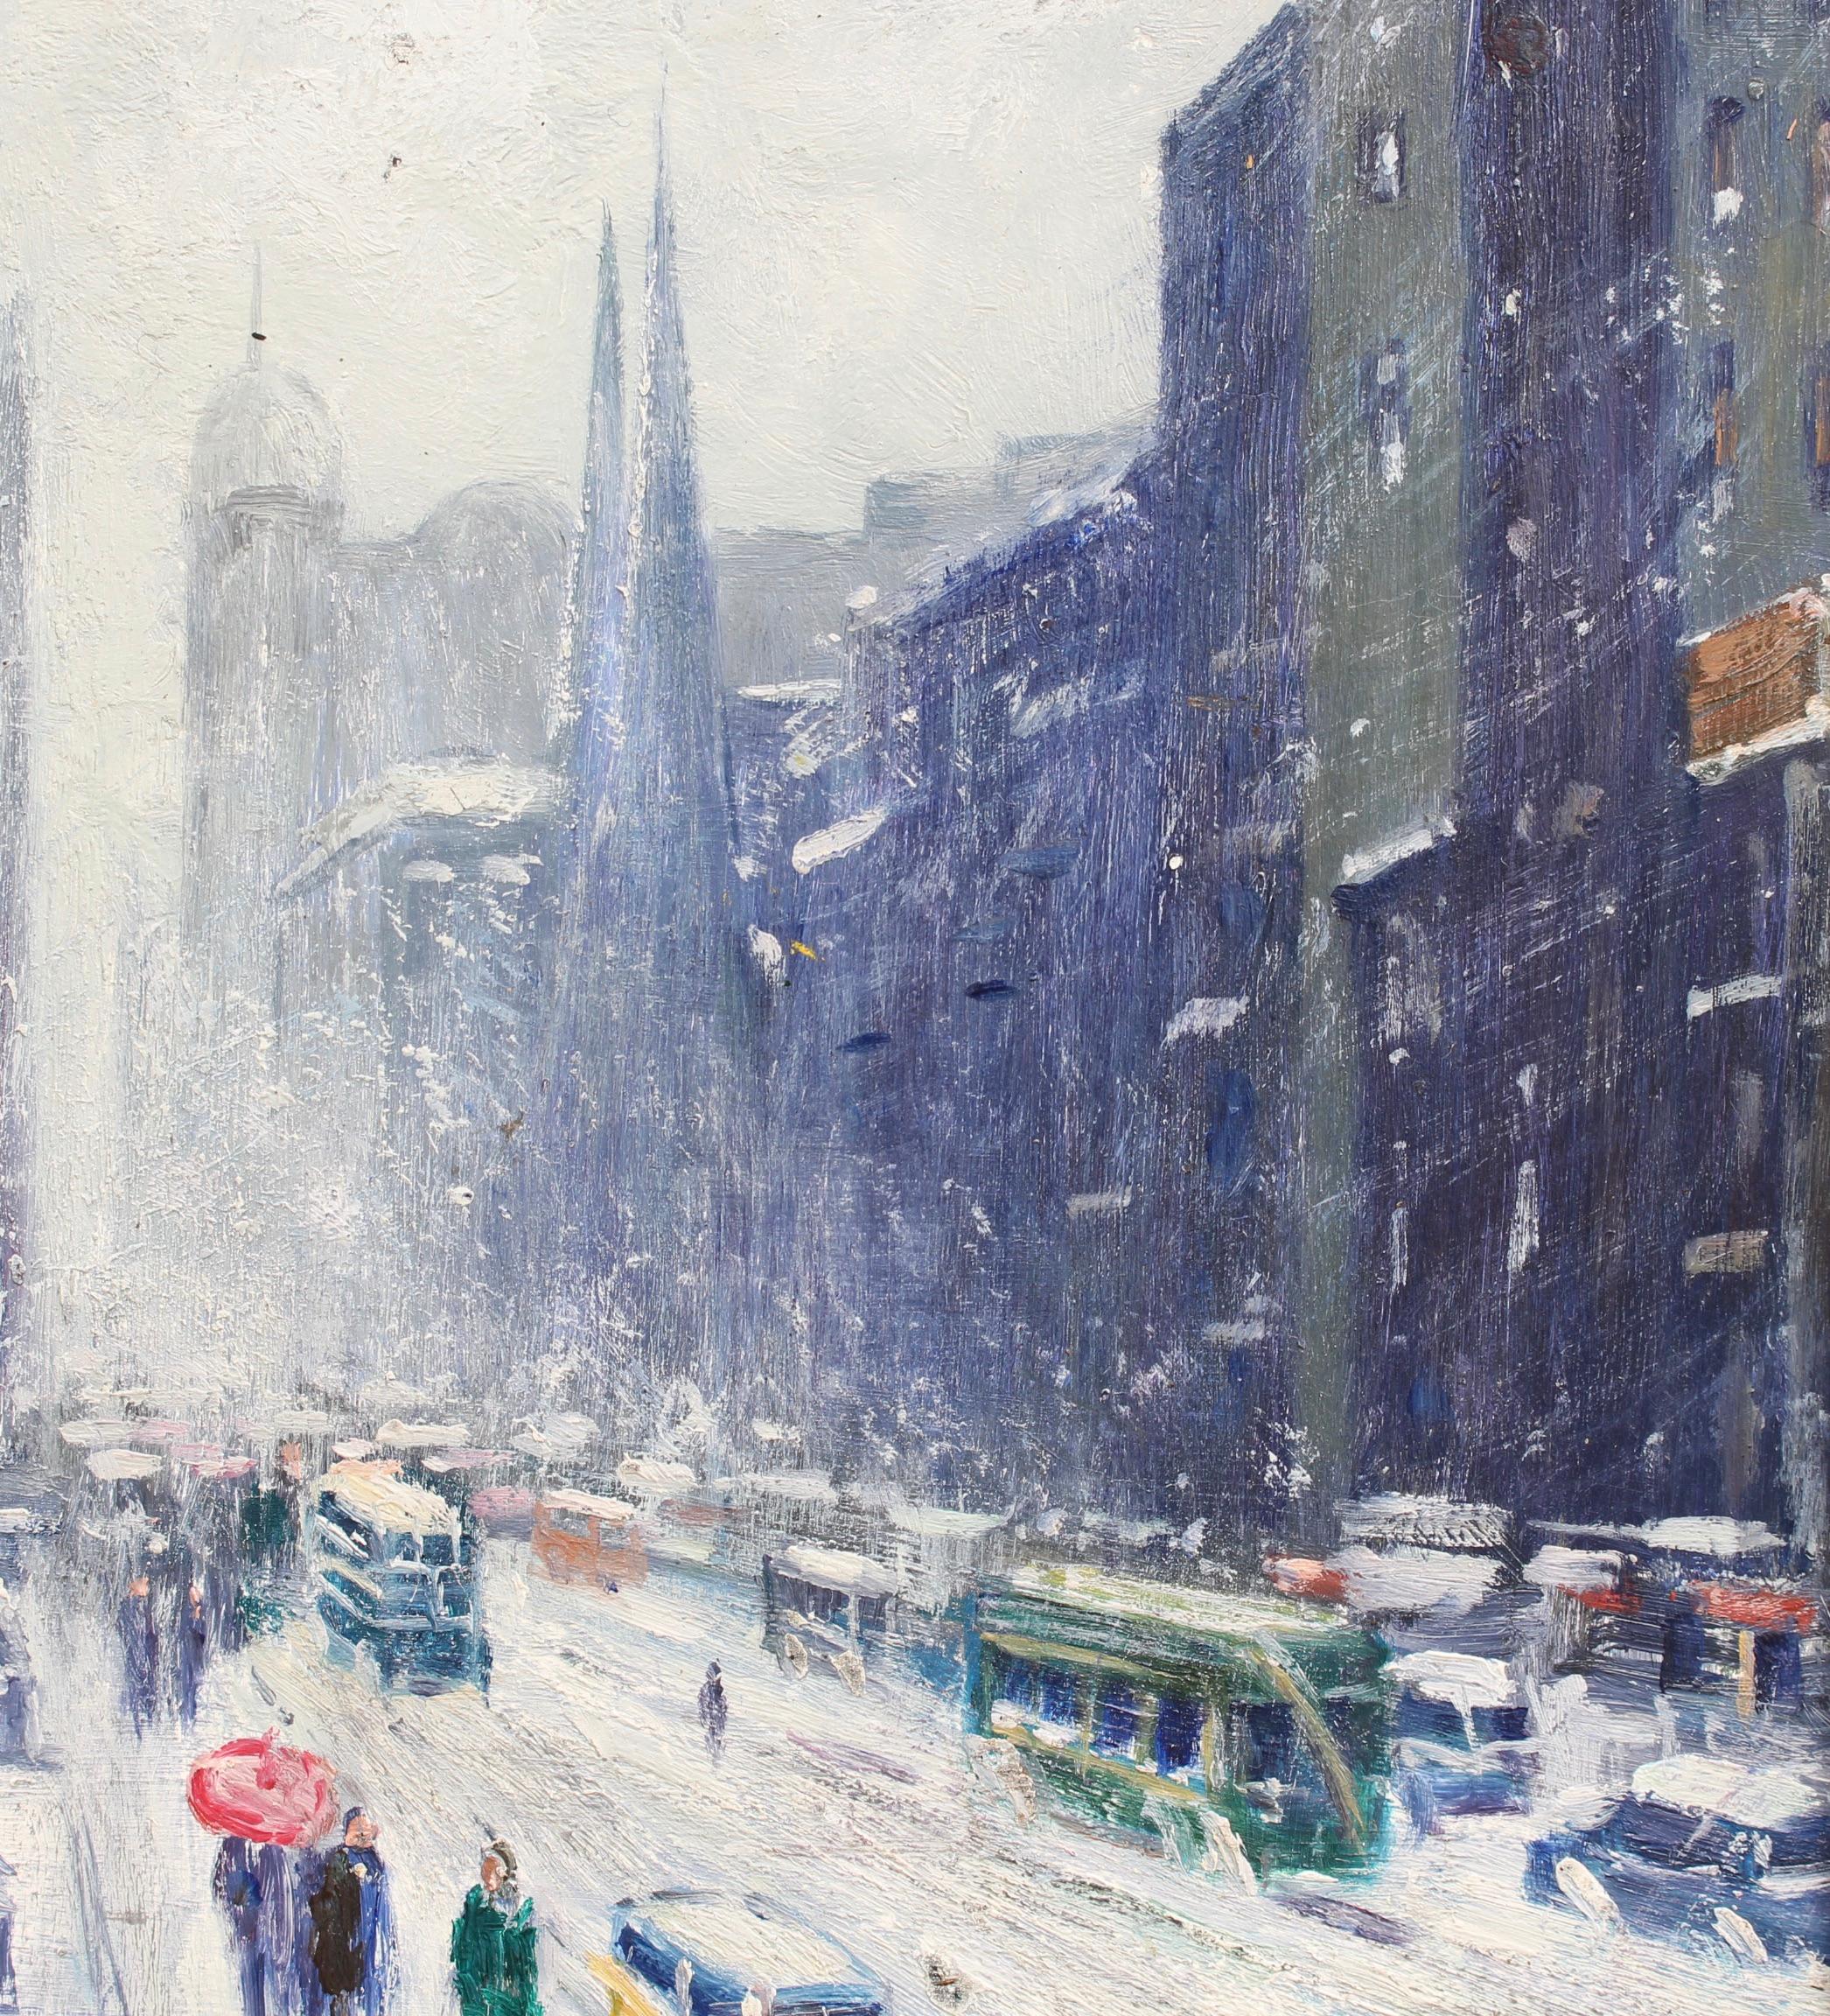 'New York Public Library Under Snow 1940s', oil on board, by Finley, after Guy Carleton Wiggins (circa 1960s). The unknown artist that created this work clearly was paying homage to the famous painter of New York City winterscapes, Guy Carleton